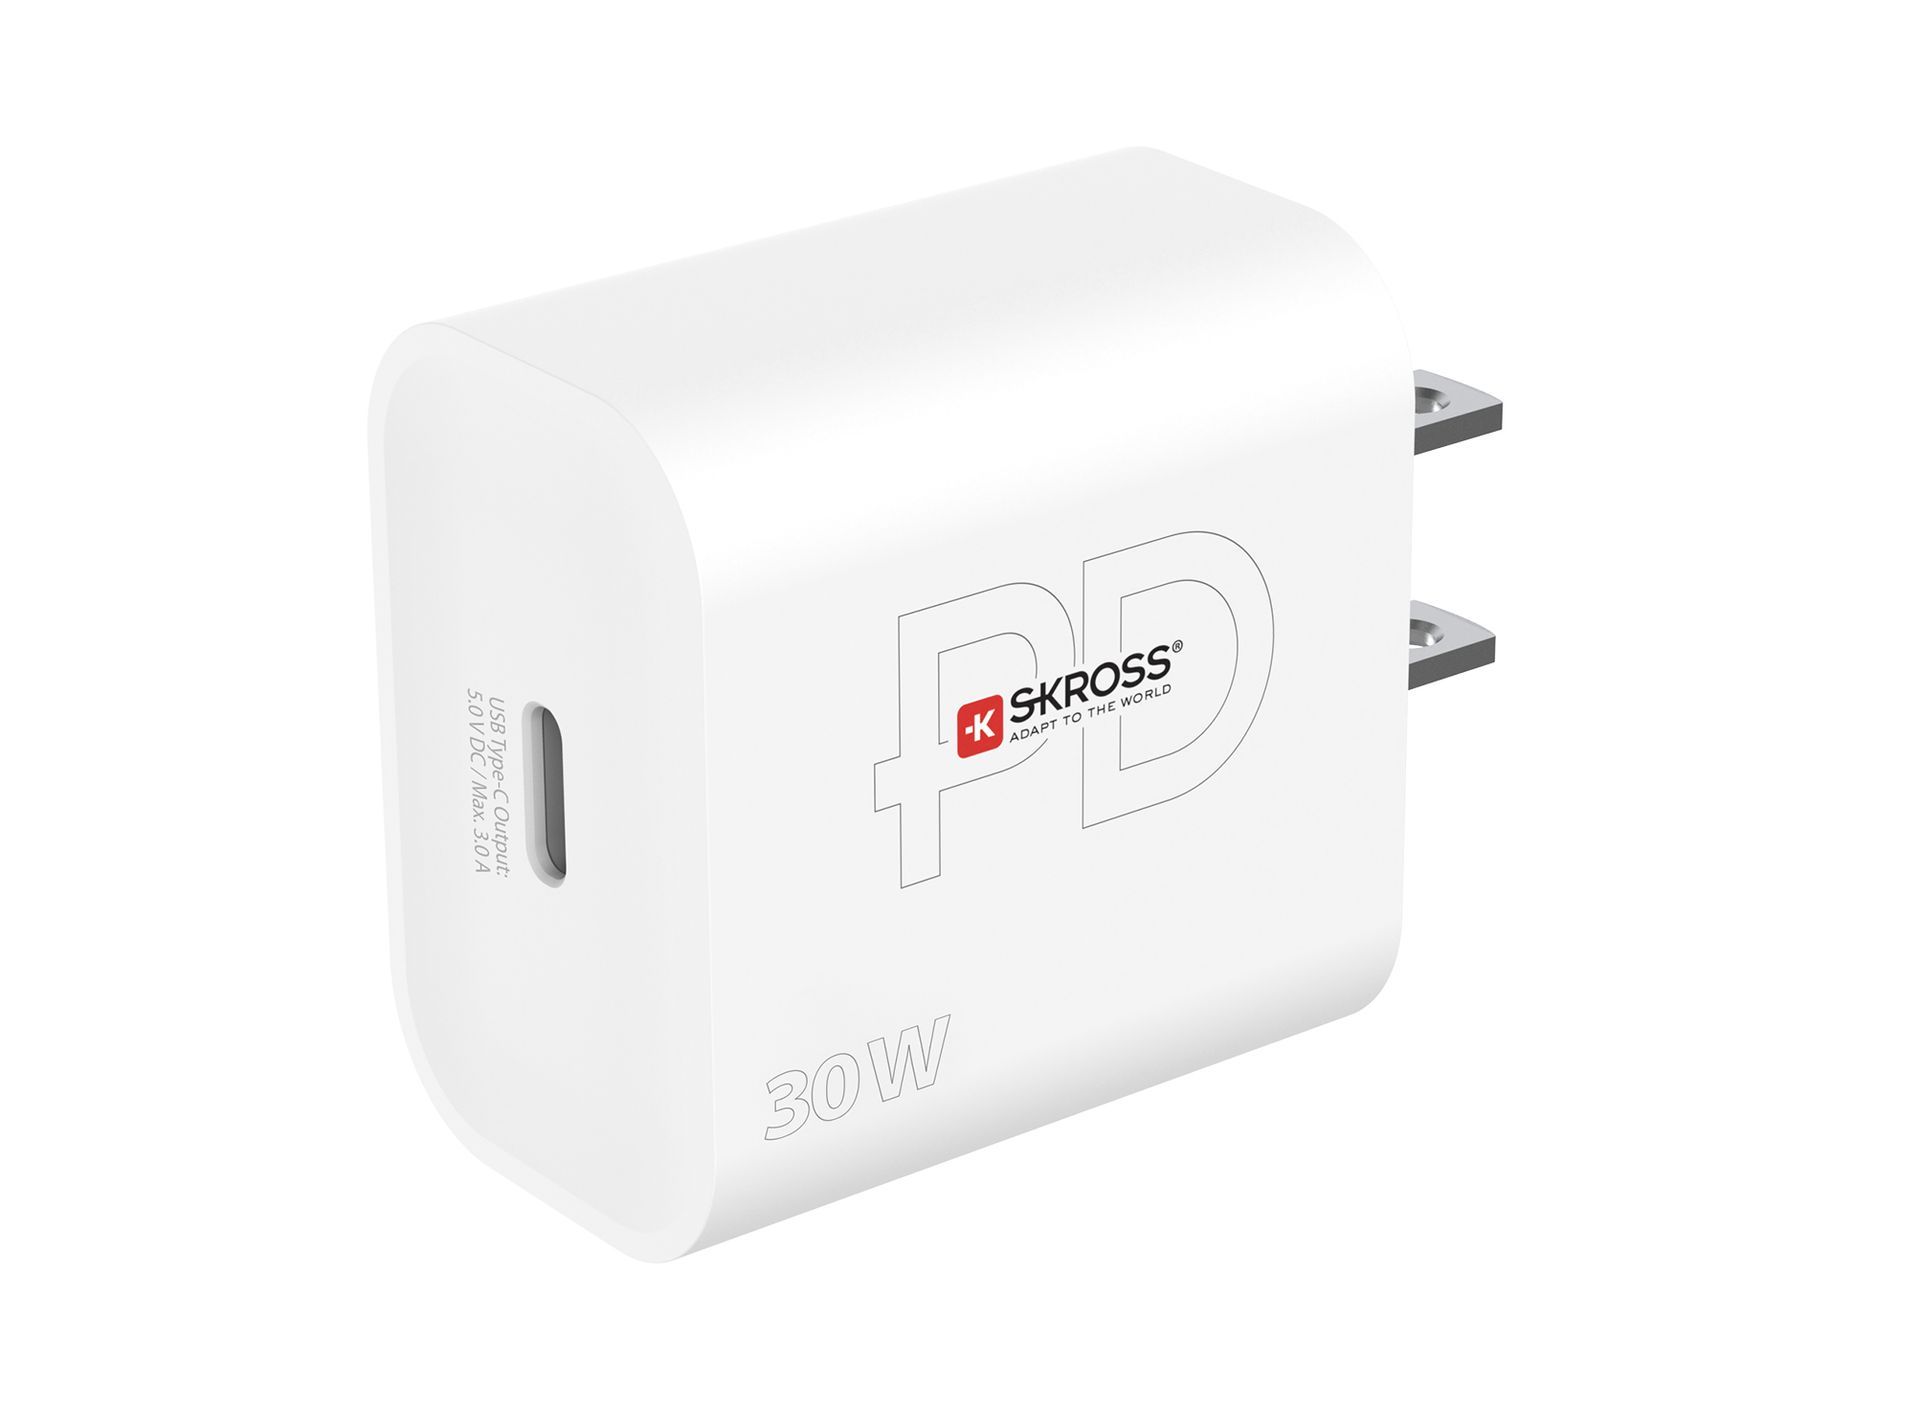 Skross power delivery USB charger Us with USB-C Port angled